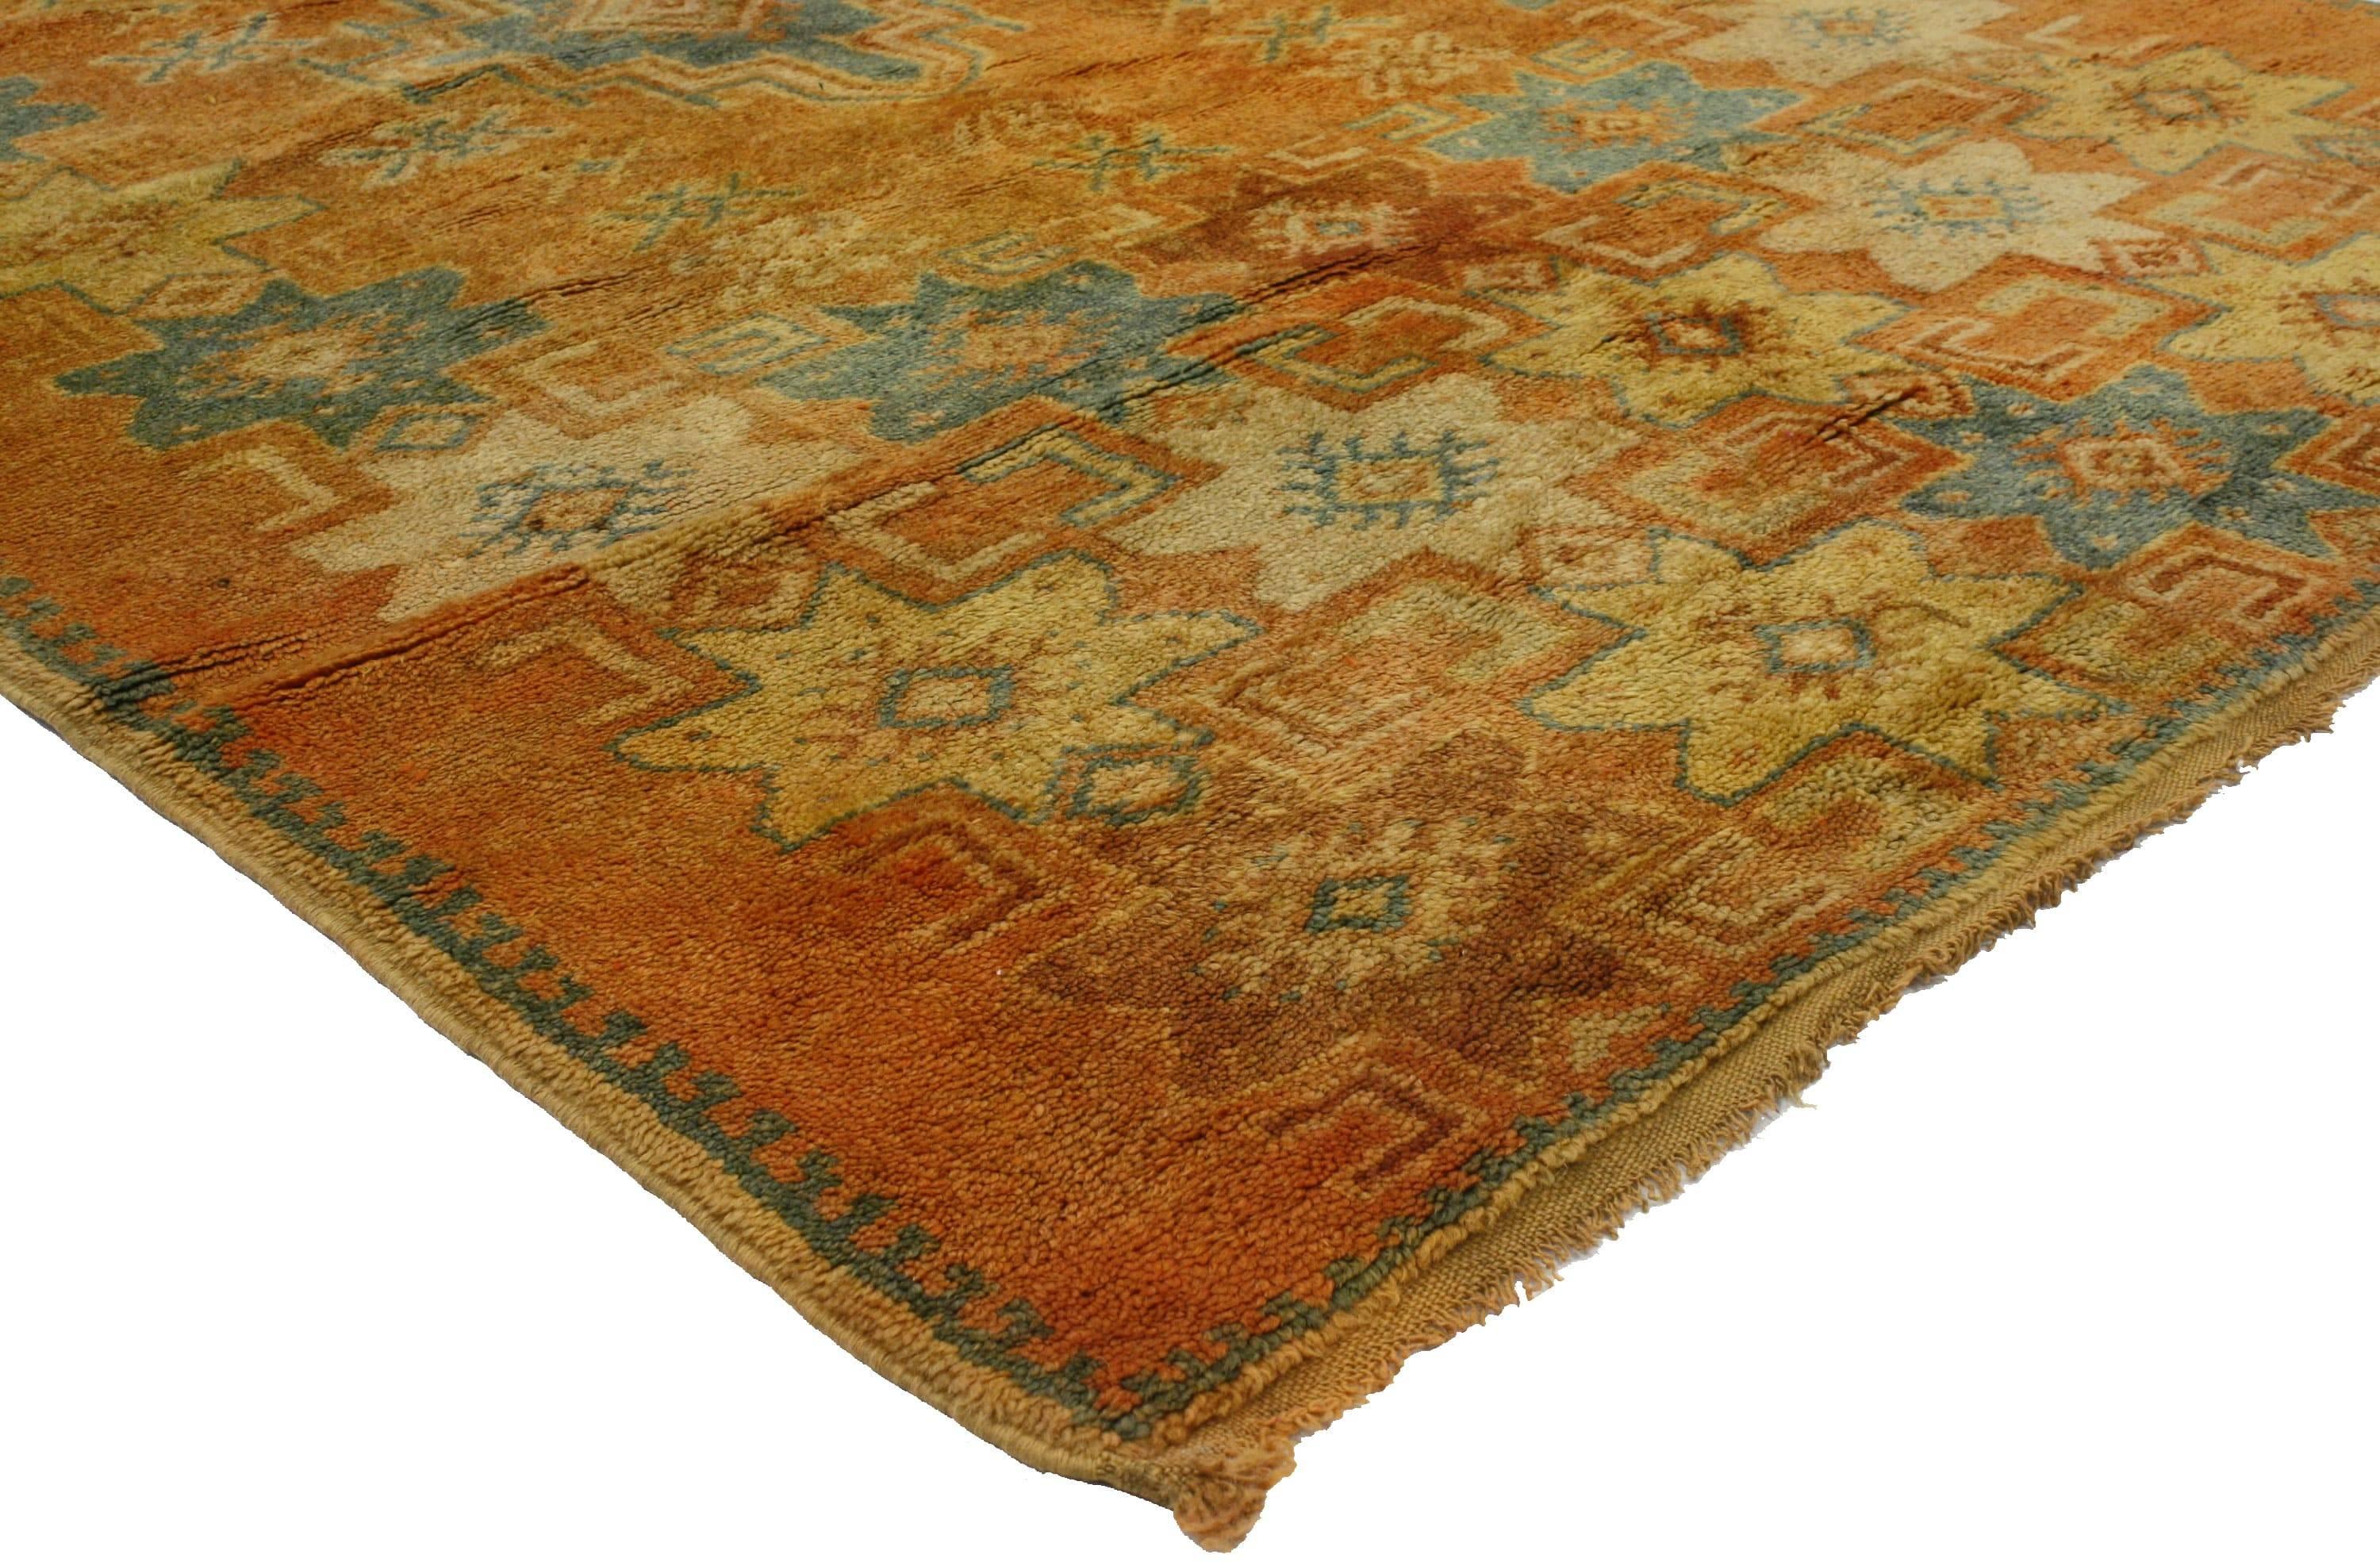 20240, vintage Berber Moroccan rug with tribal style This hand-knotted wool vintage Berber Moroccan rug is one of a kind, as it projects vivacious color, intricate geometric pattern and carries deep meaning woven within the piece through the symbols